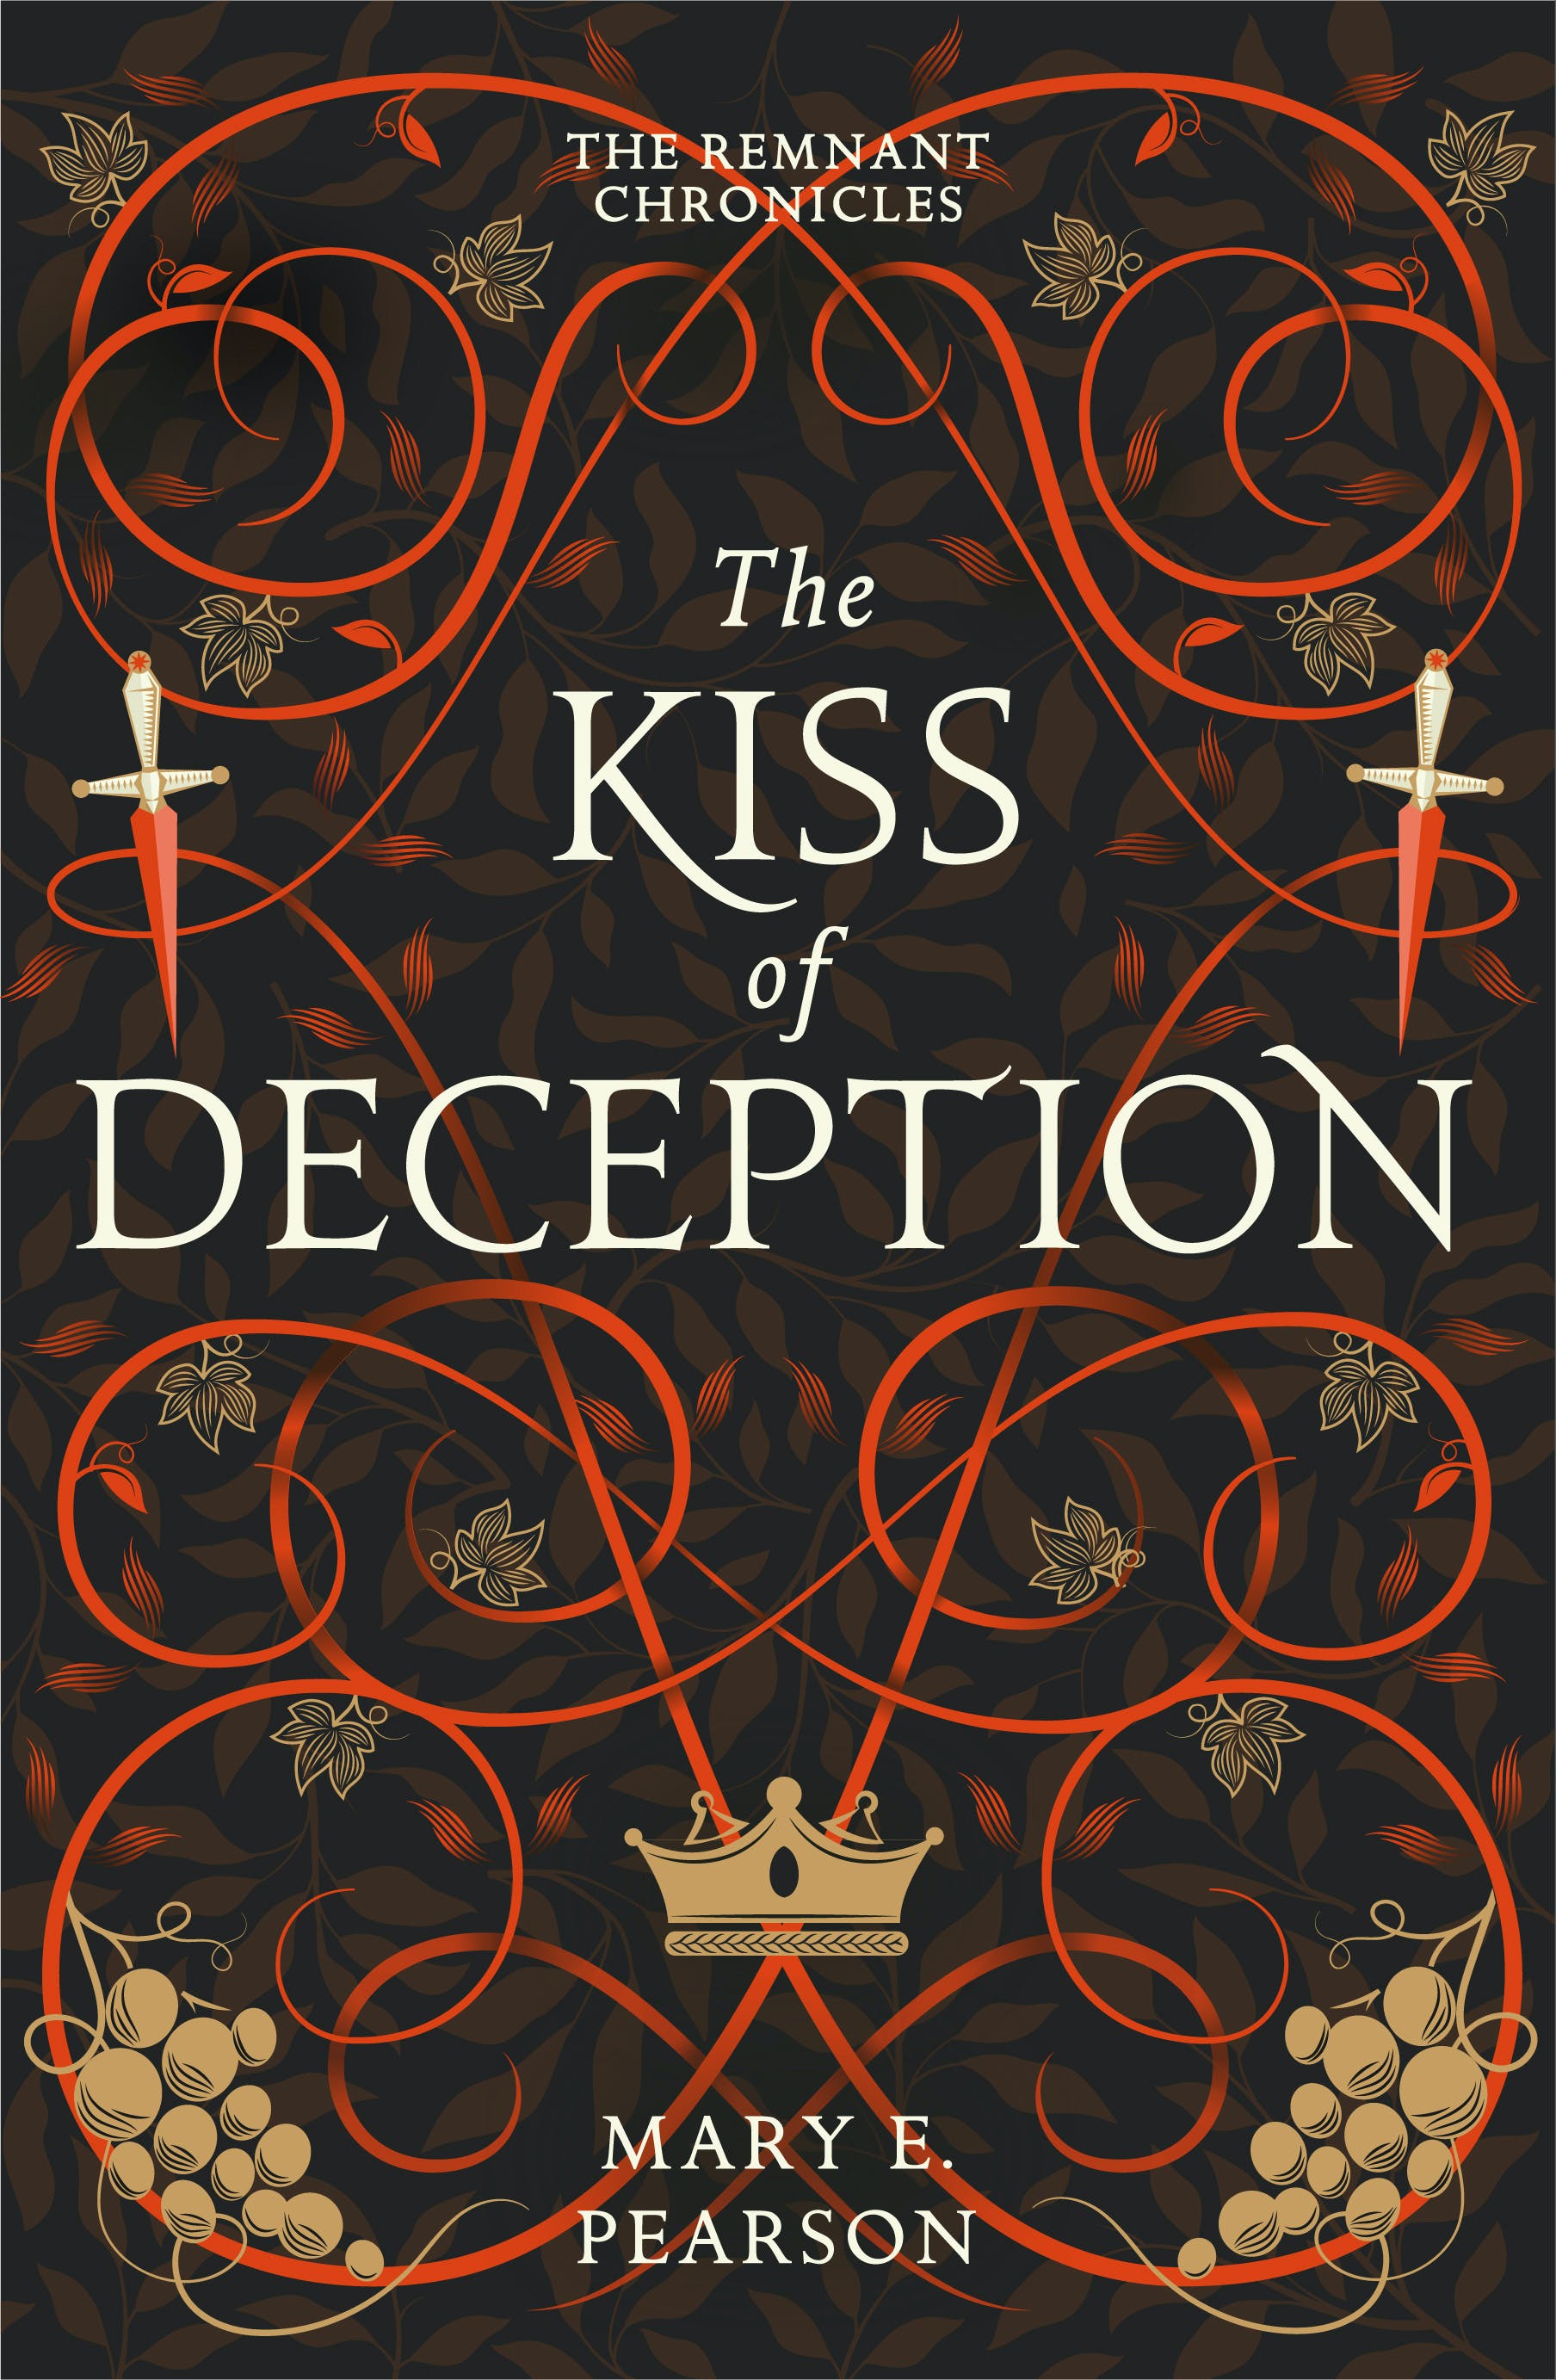 THE REMNANT CHRONICLES 1: THE KISS OF DECEPTION